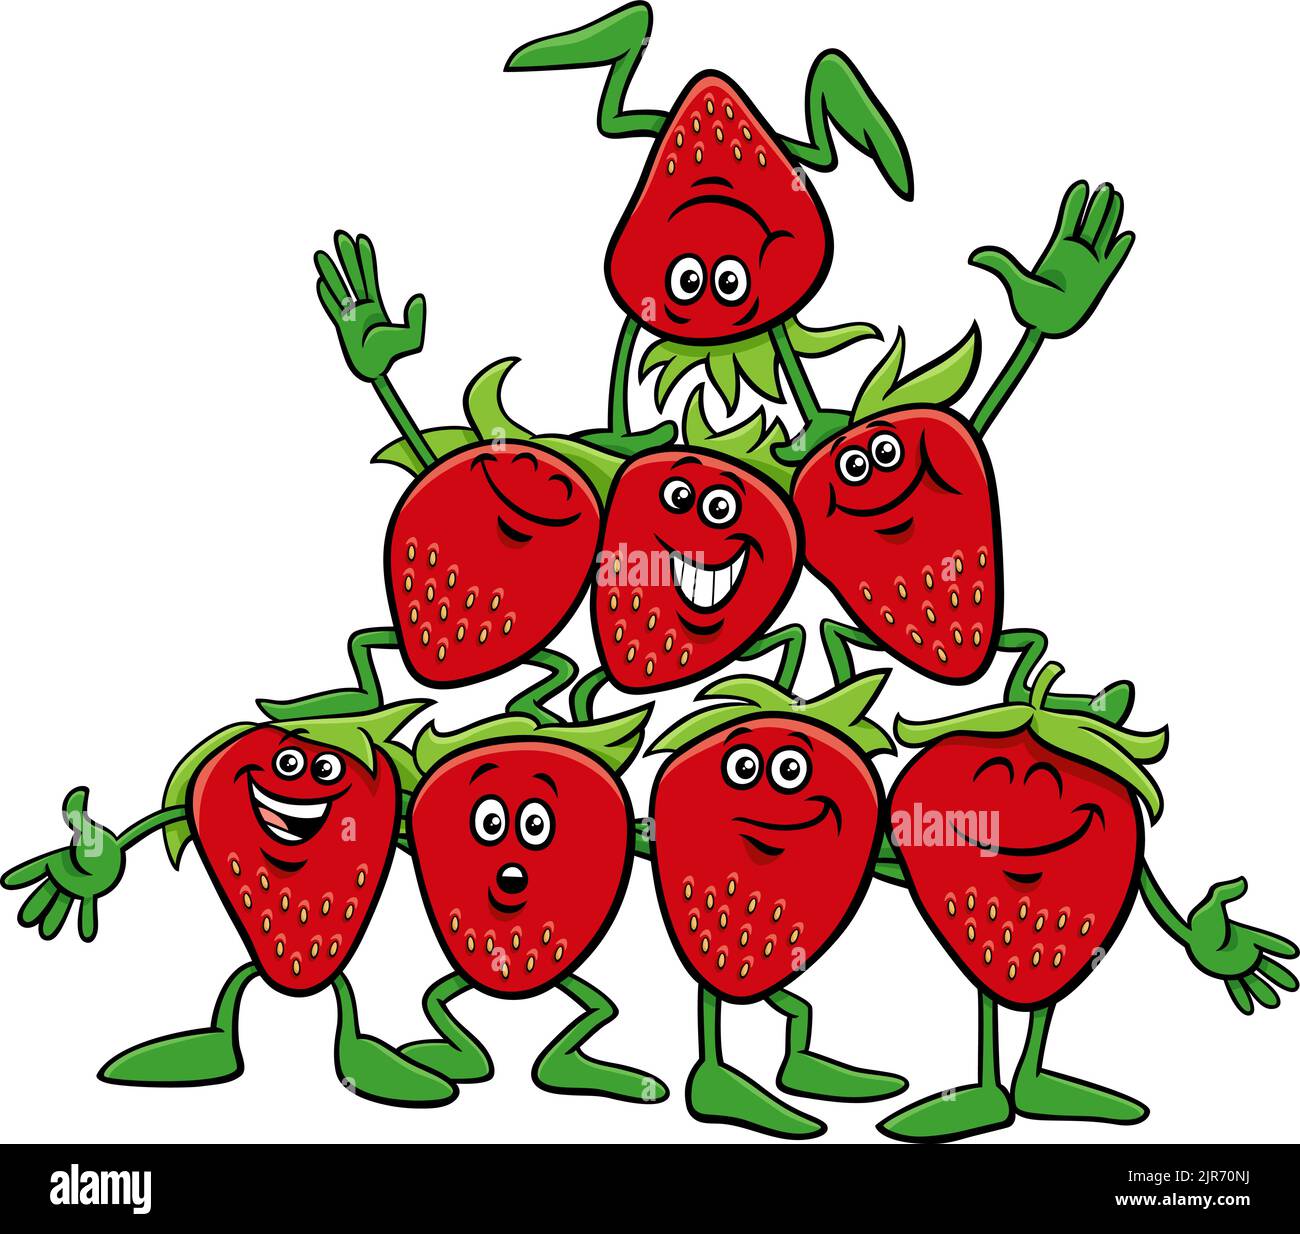 Cartoon illustration of happy strawberries or wild strawberries comic characters group Stock Vector